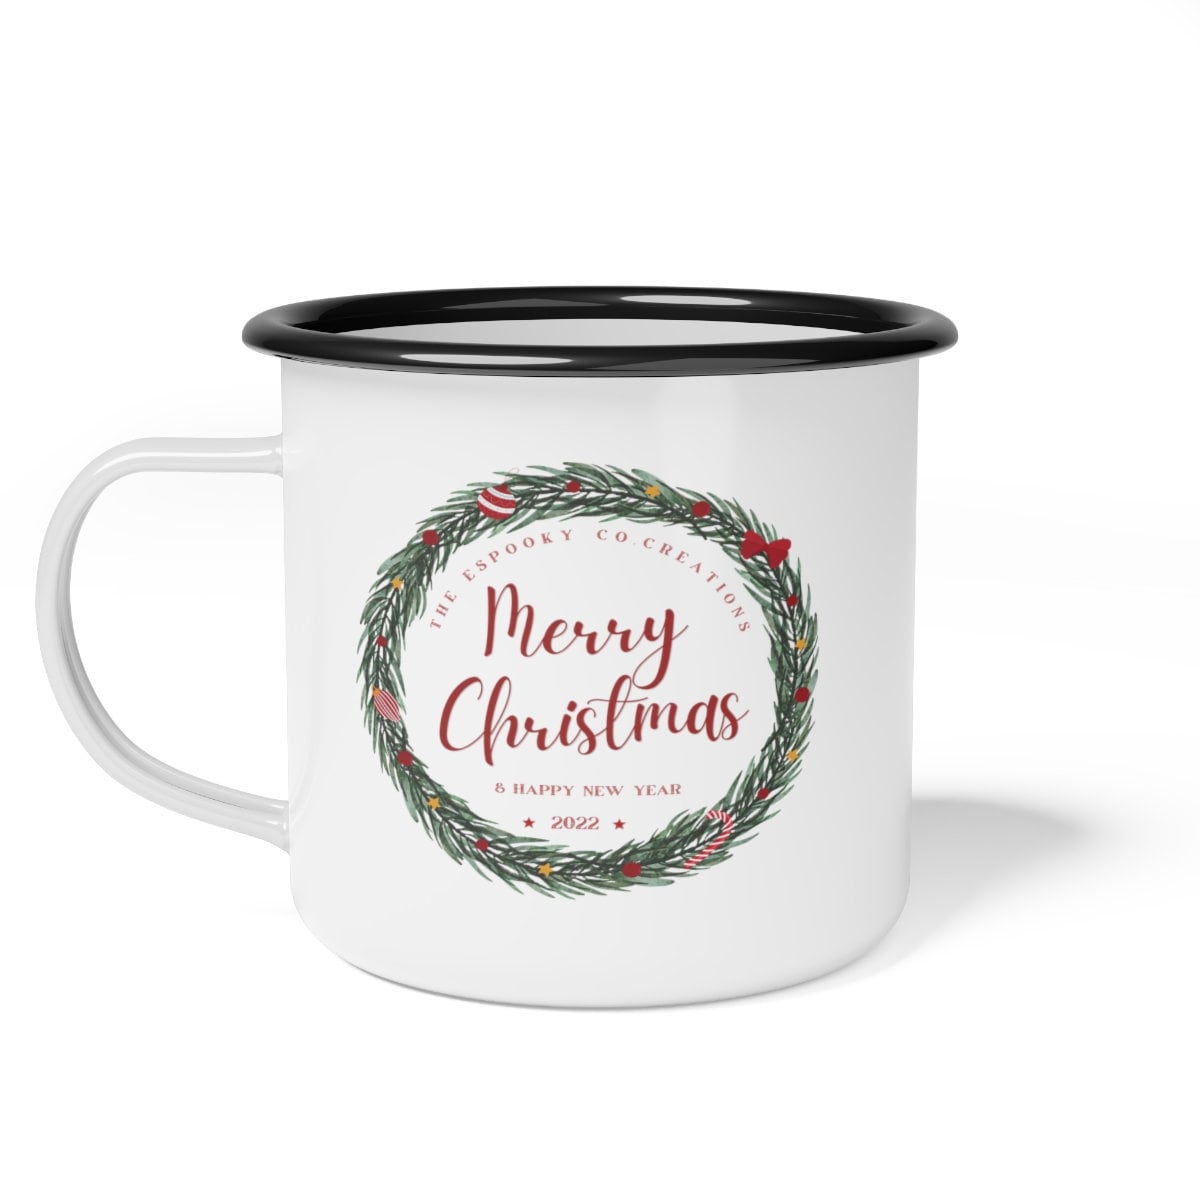 Kids Christmas Cups, Christmas Party Favors Kids, Personalized